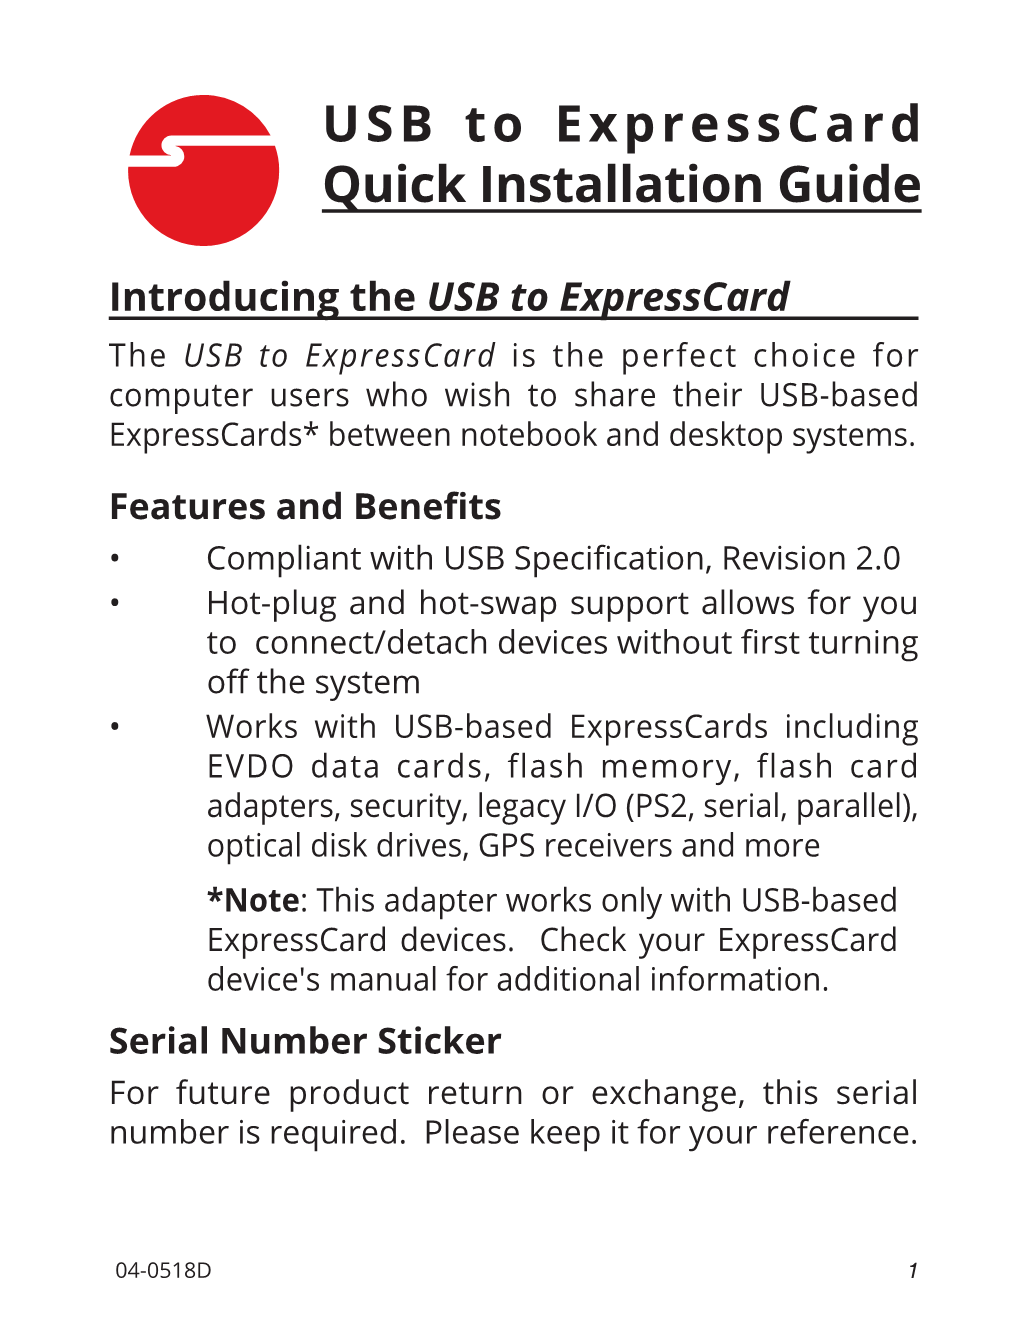 USB to Expresscard Quick Installation Guide